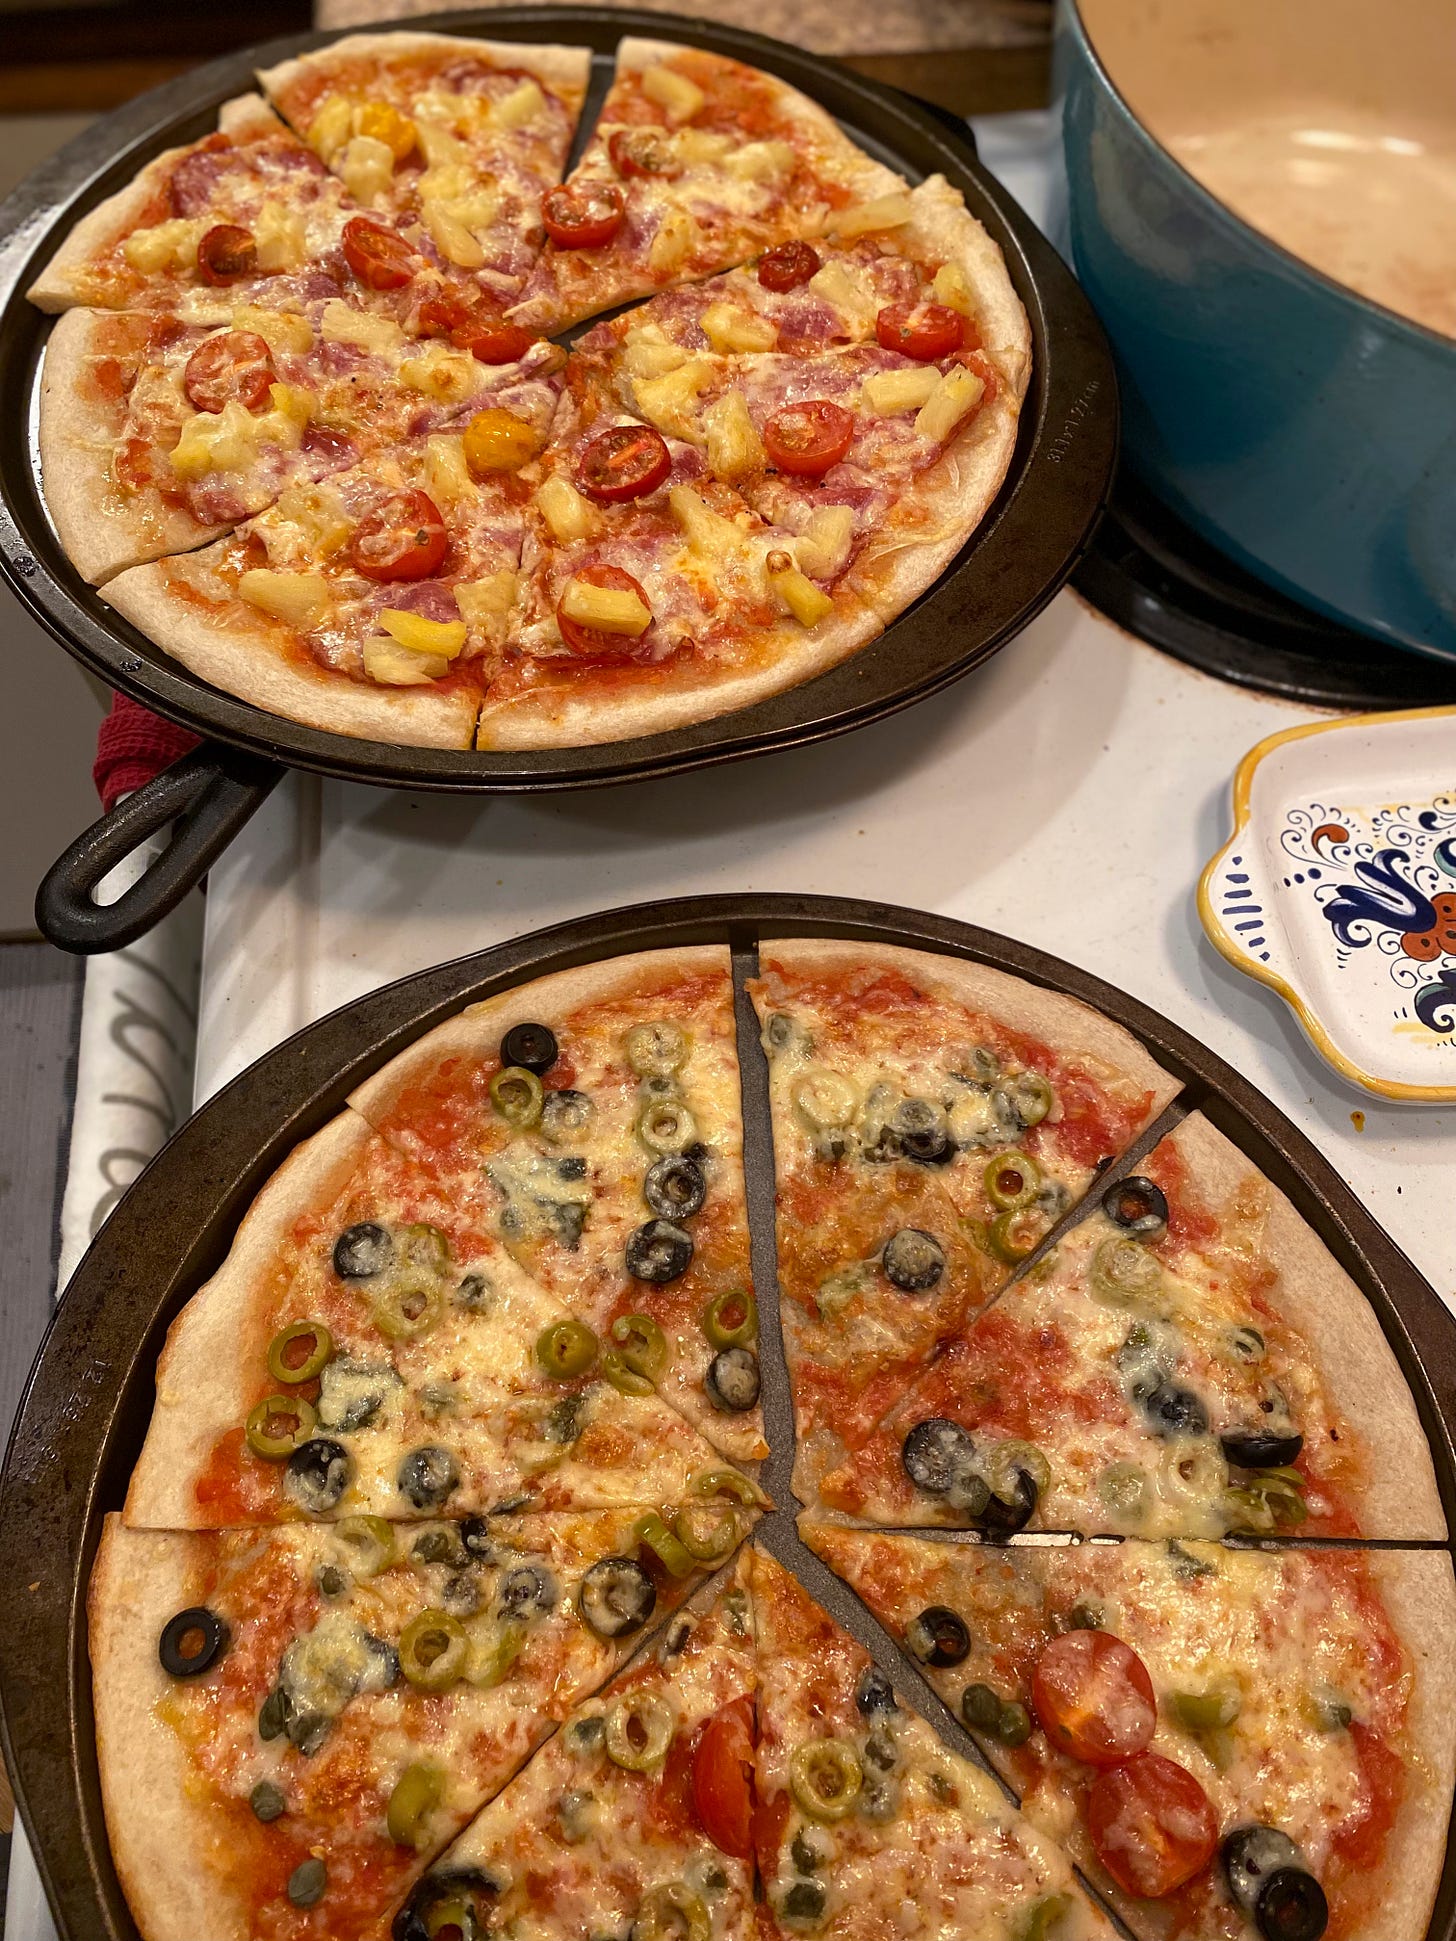 Two pizzas in their pans on the stove, sliced into eight pieces each. The one in the foreground has two kinds of olives, capers, and grape tomatoes, and in the background is one with capocollo, pineapple, and the same kind of tomatoes. Both are lightly covered in melted cheese that has browned in places.